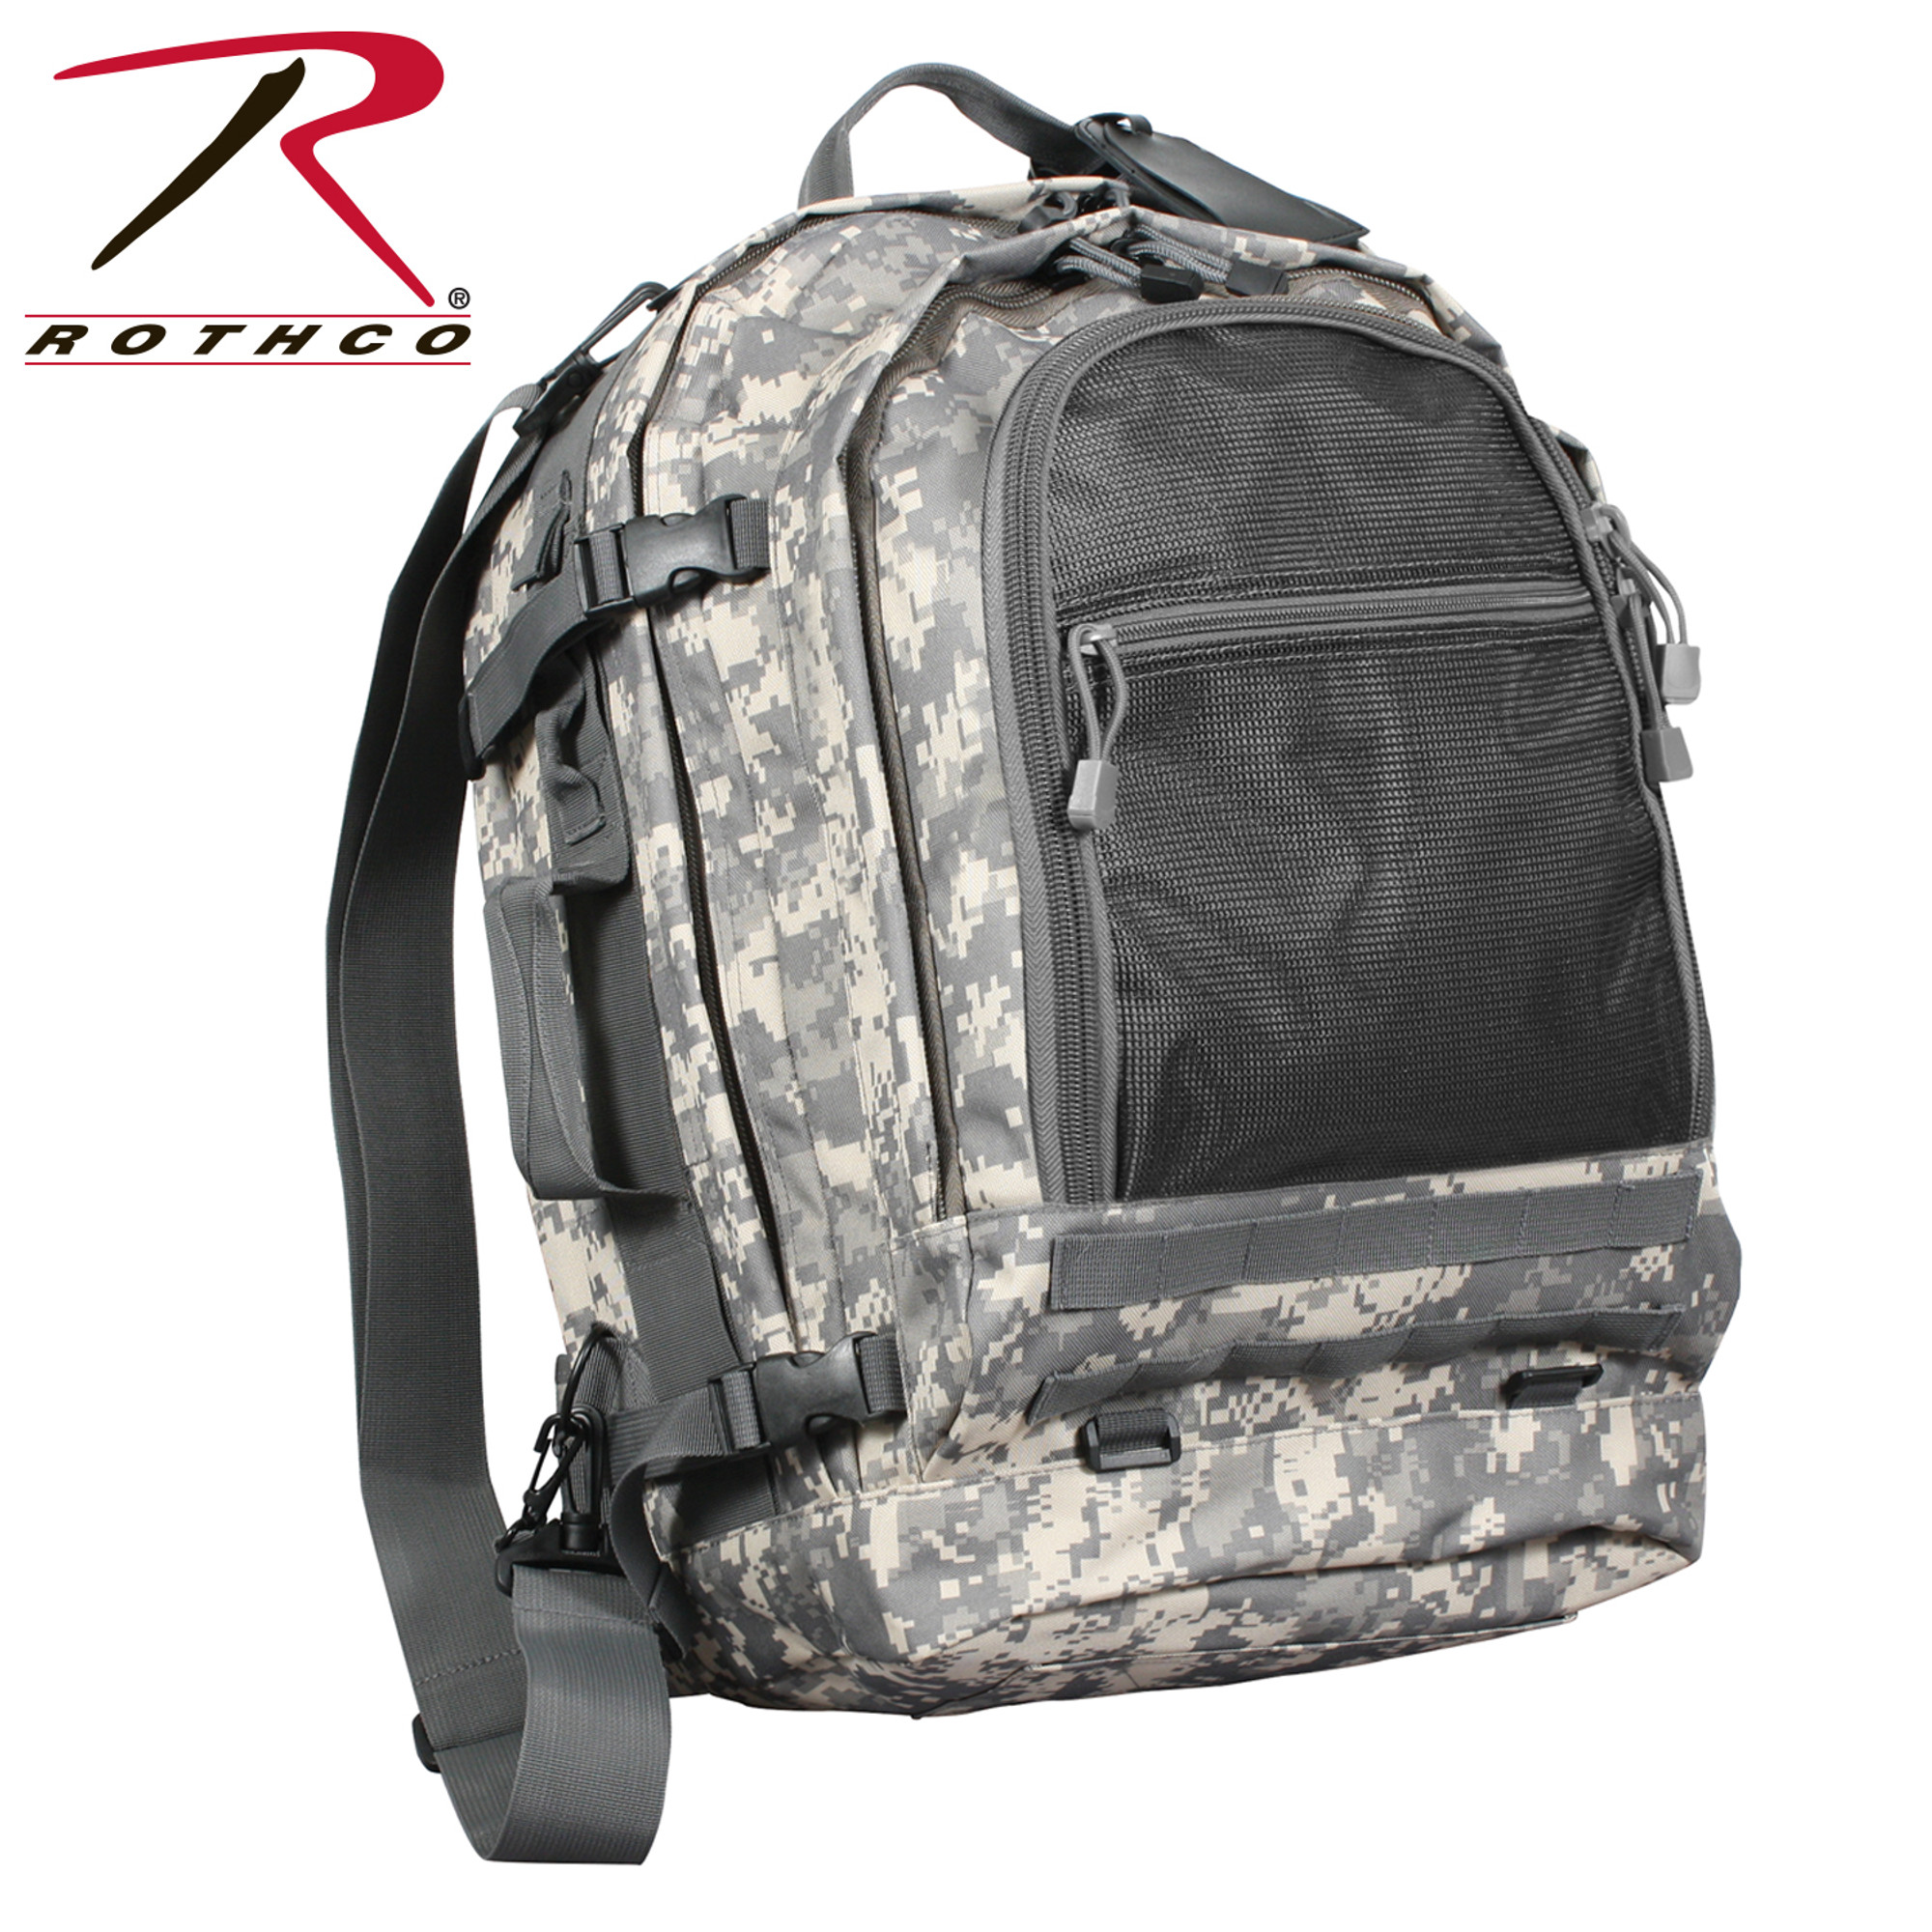 Rothco Move Out Tactical Travel Backpack - ACU Digital